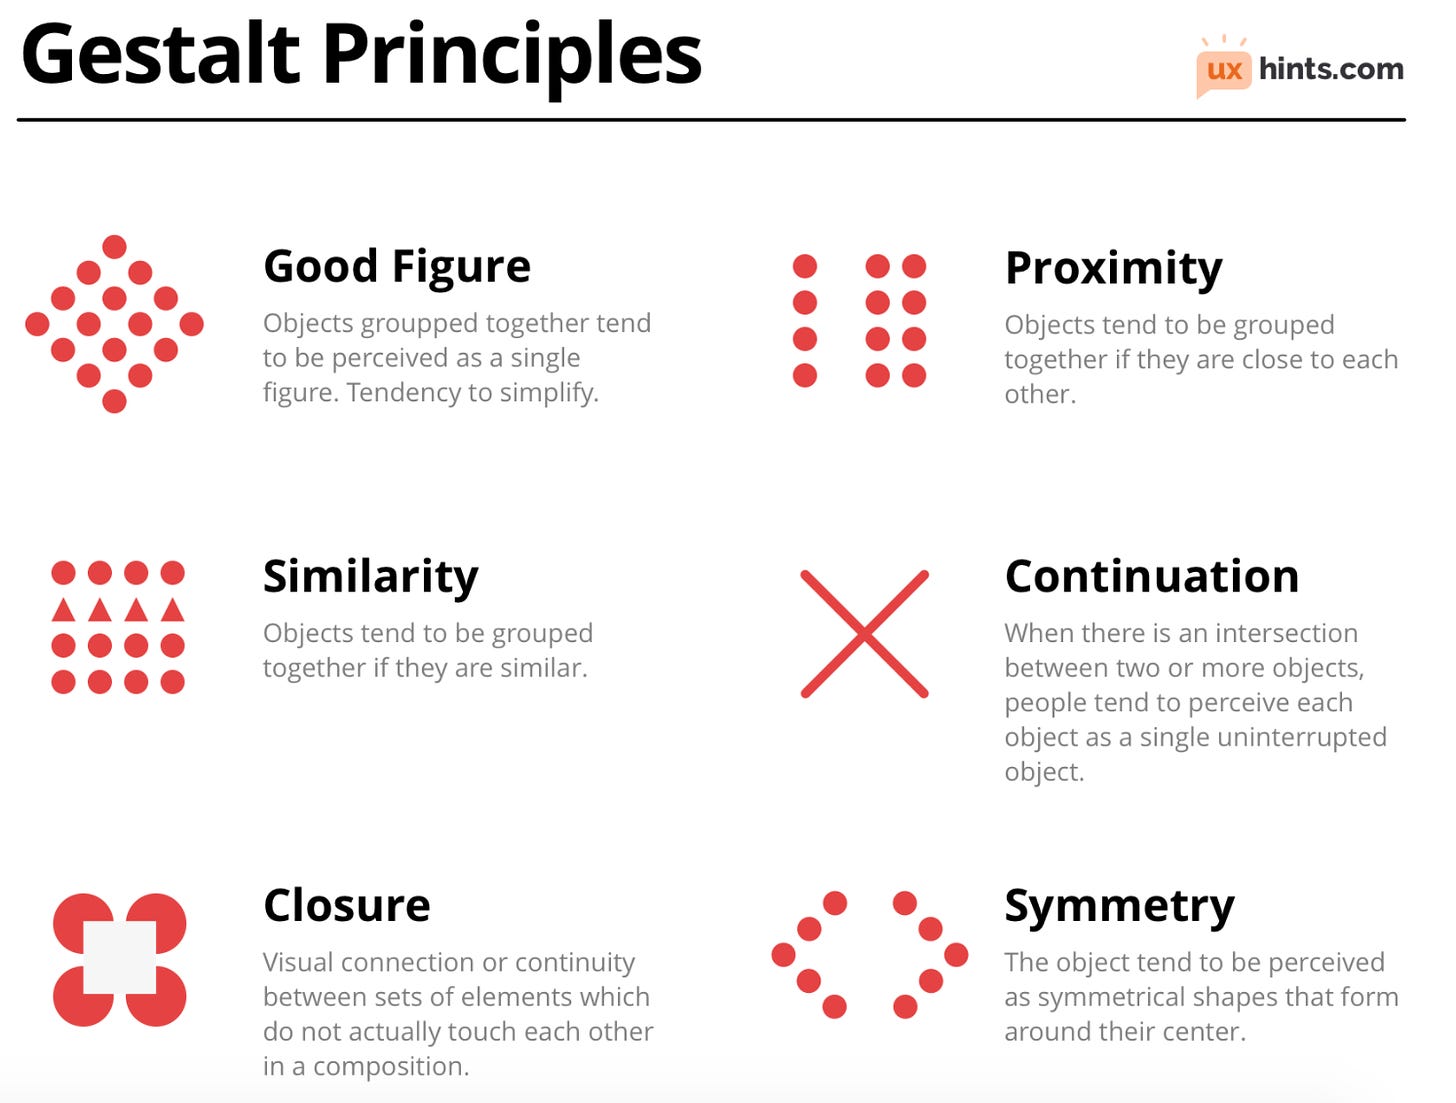 gestalt principless such as grouping, closure